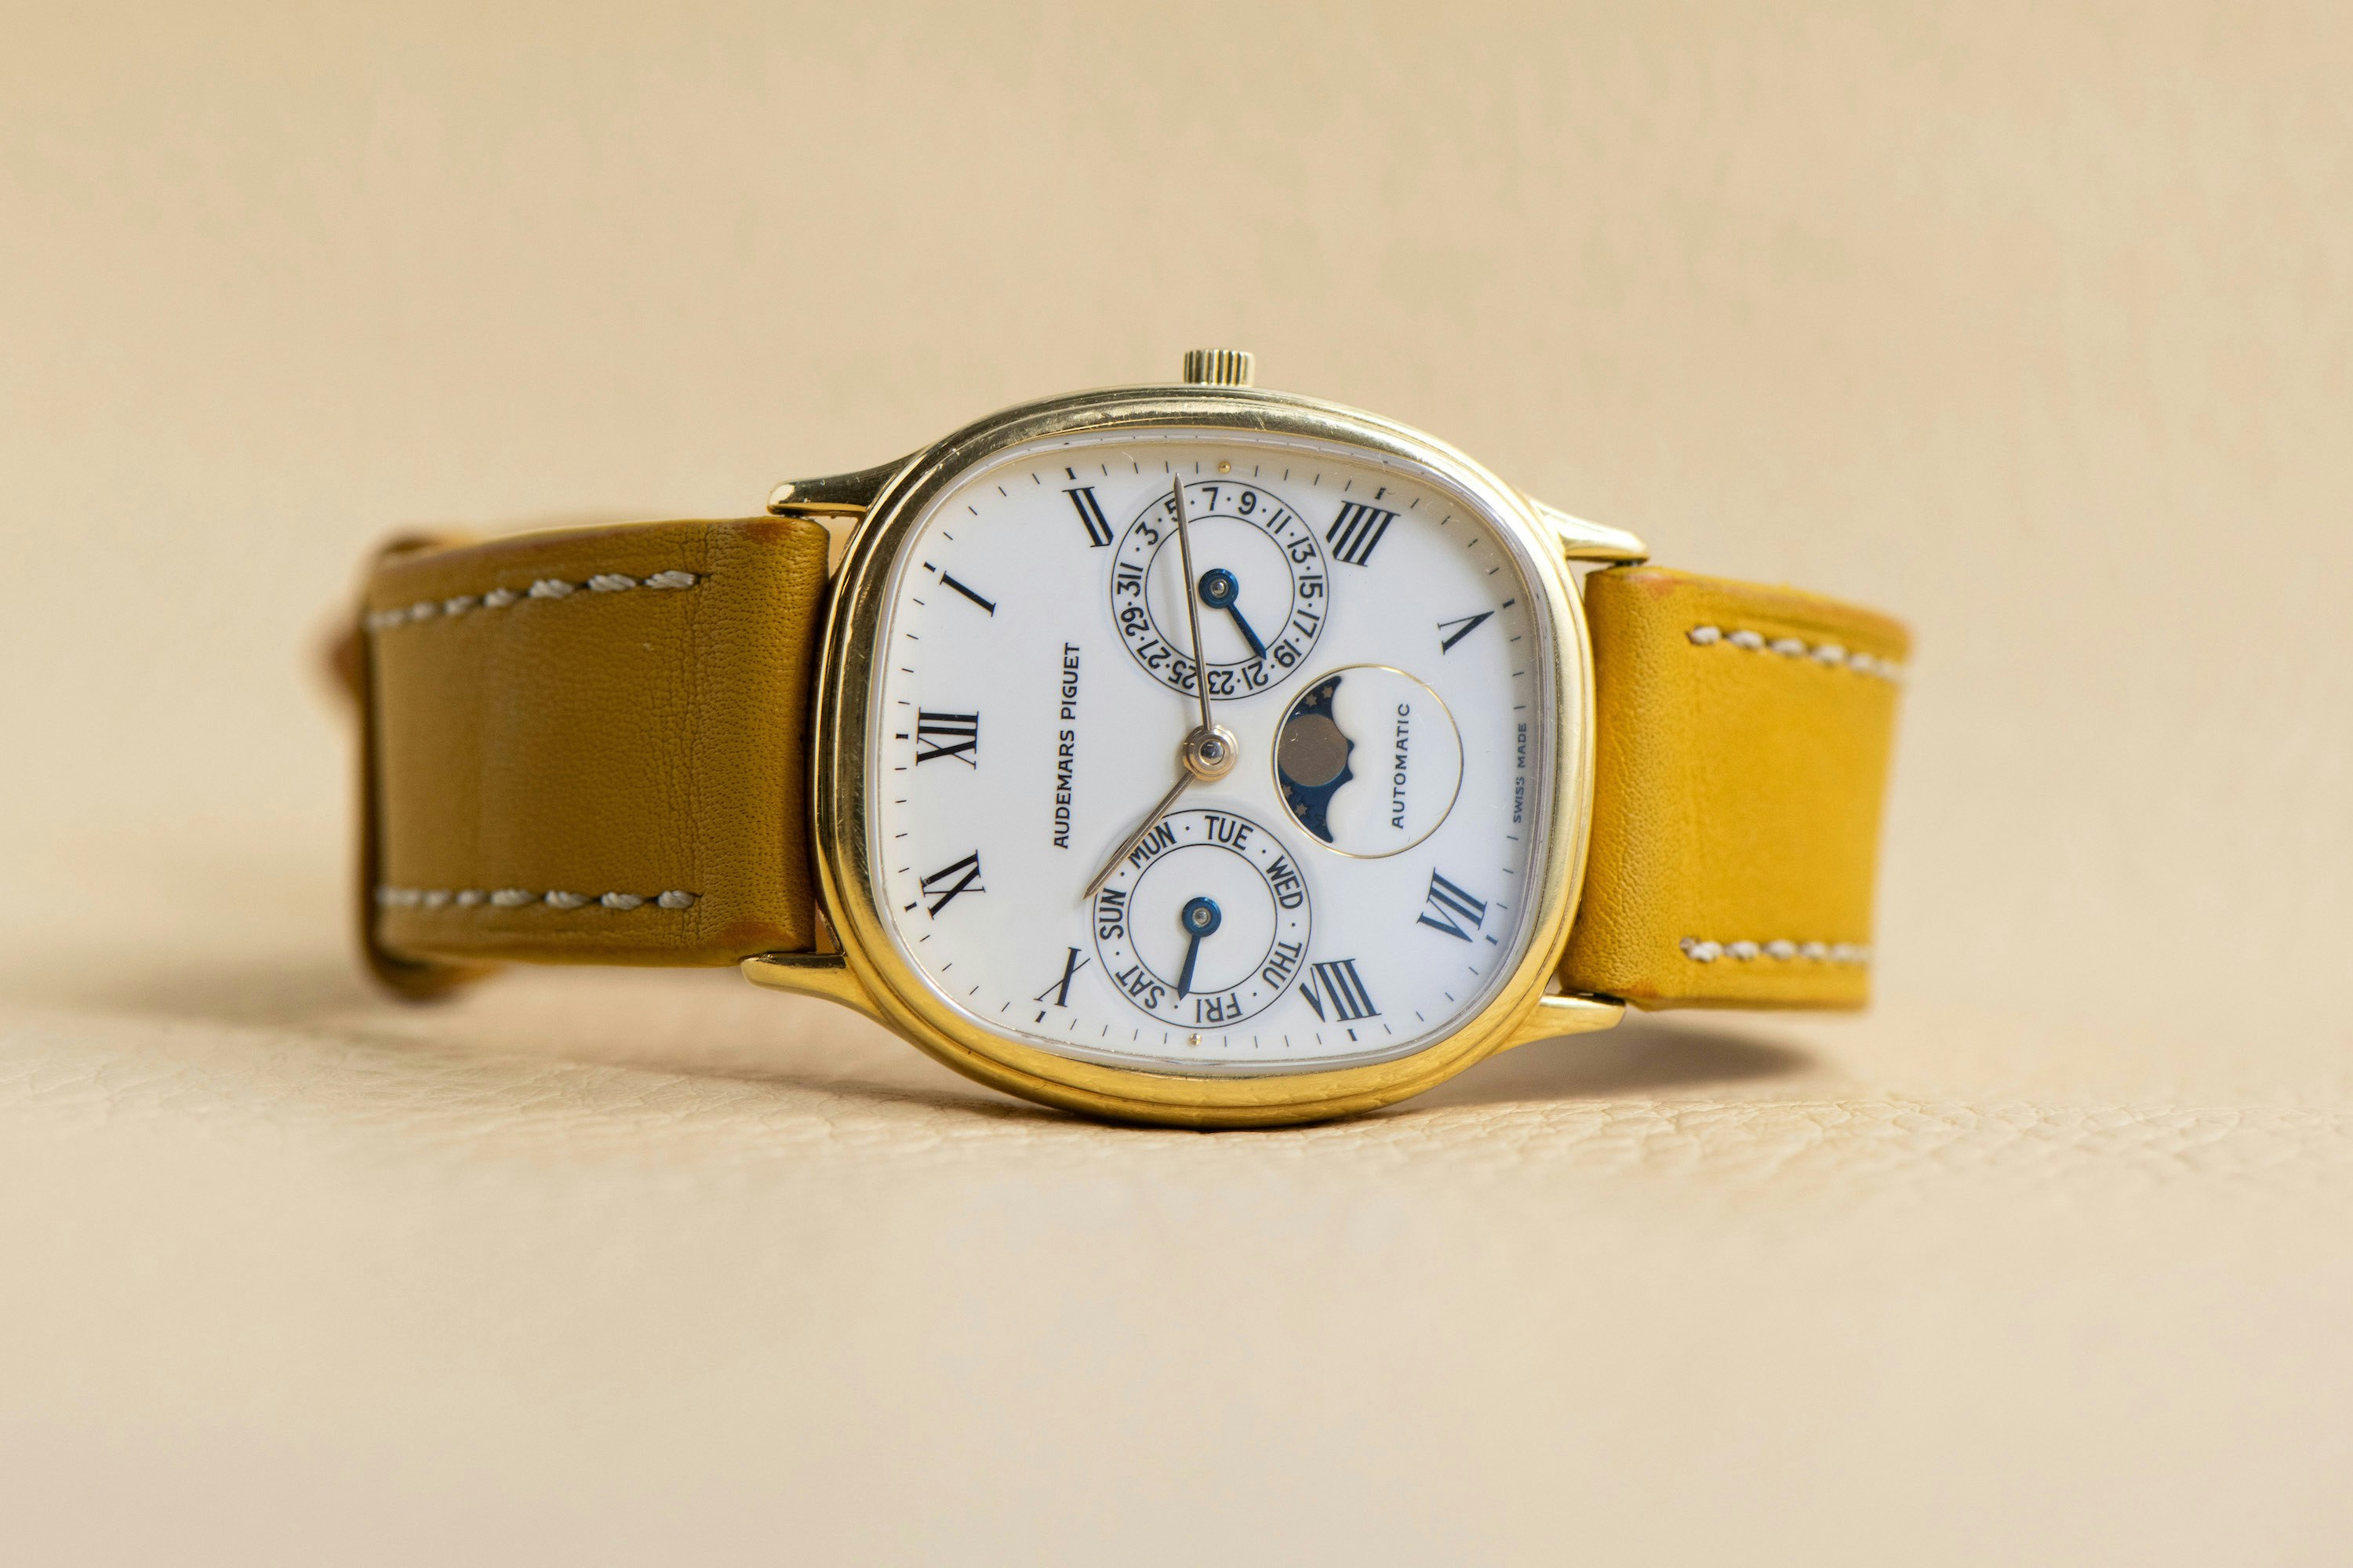 1980S AUDEMARS PIGUET DAY-DATE MOONPHASE for sale by auction in London, United Kingdom